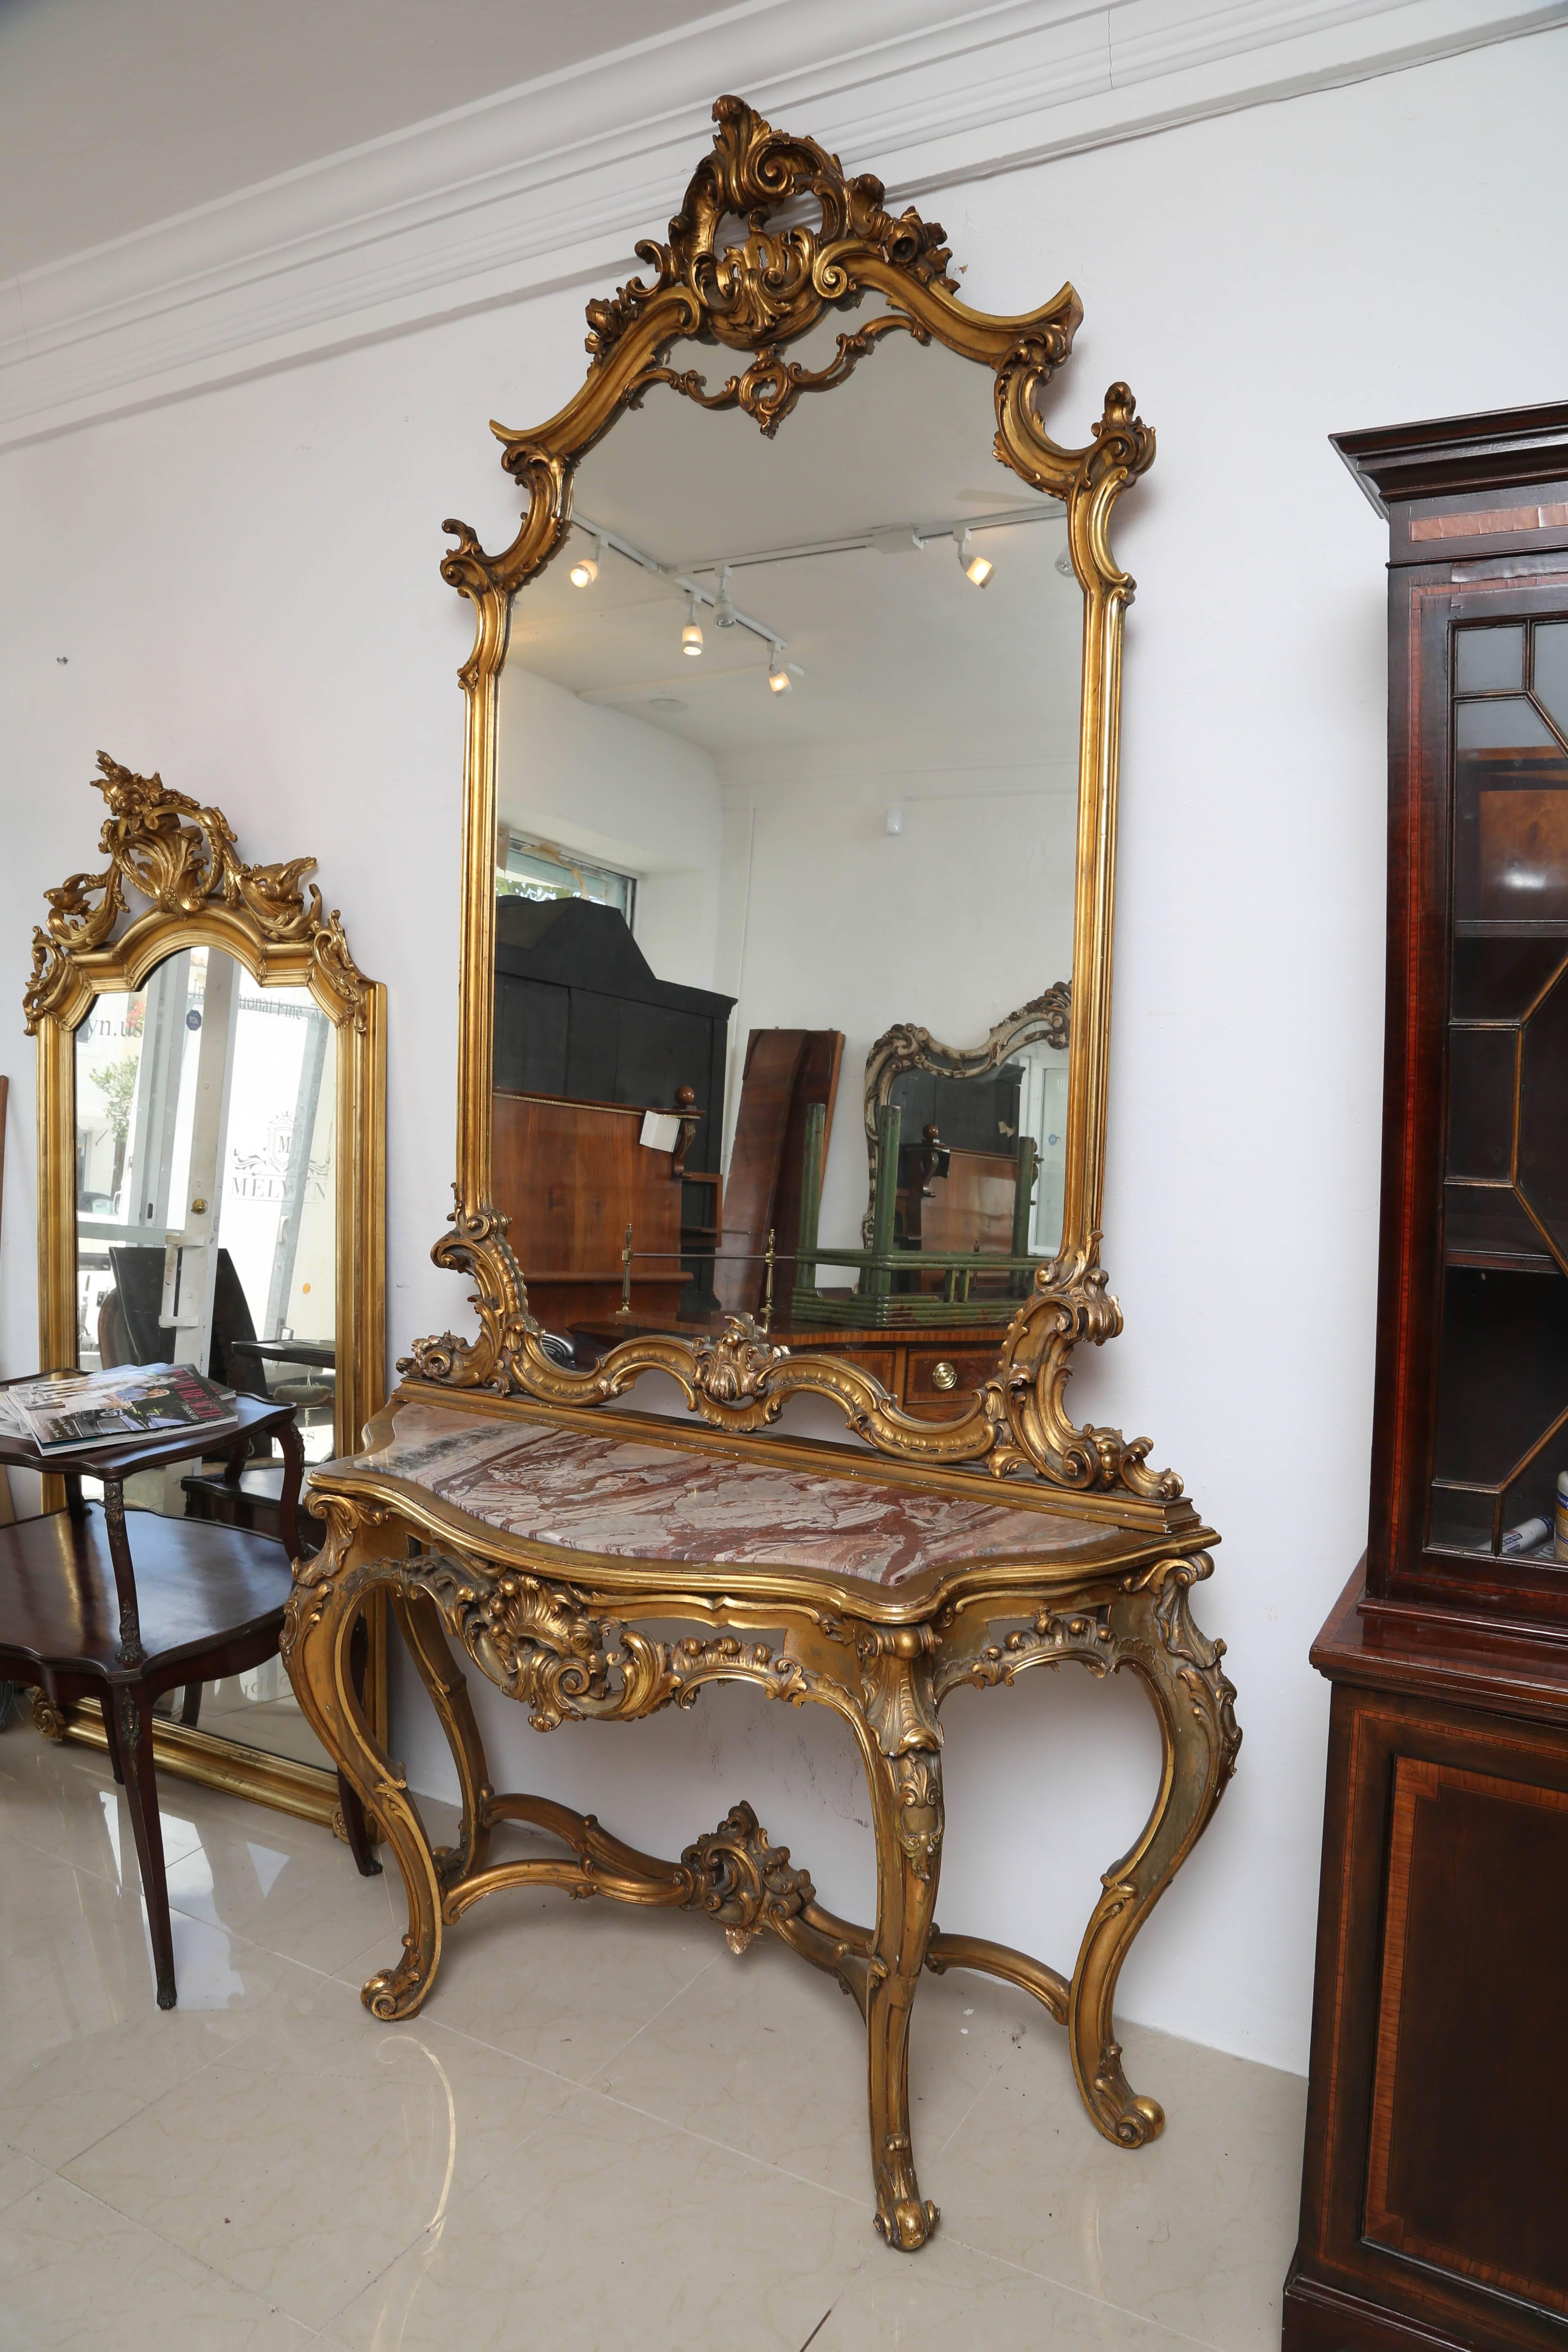 Superb gilt console table with marble top and mirror, it sits on large French style carved cabriolet legs.
This comes in two parts, it could be used as two separate items.
The gilding is all original and in good condition, superb carving all-over